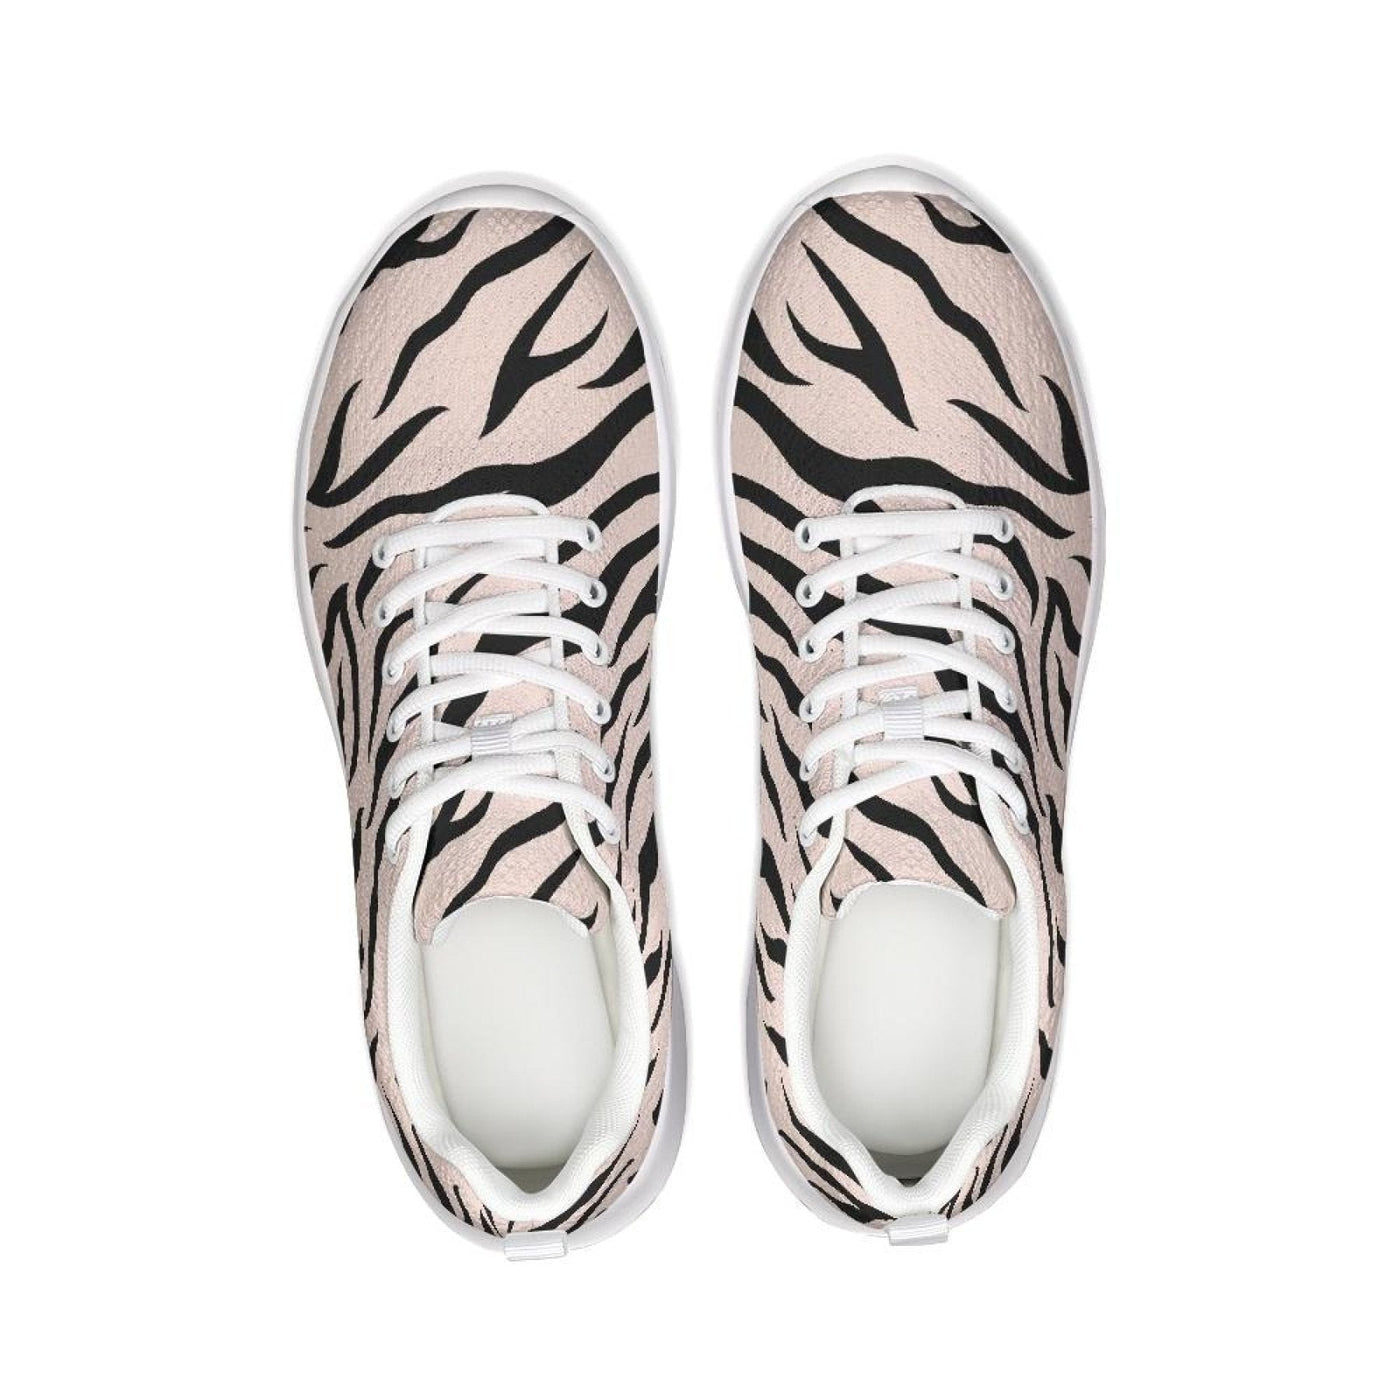 Womens Sneakers - Pink And Black Zebra Stripe Canvas Sports Shoes / Running